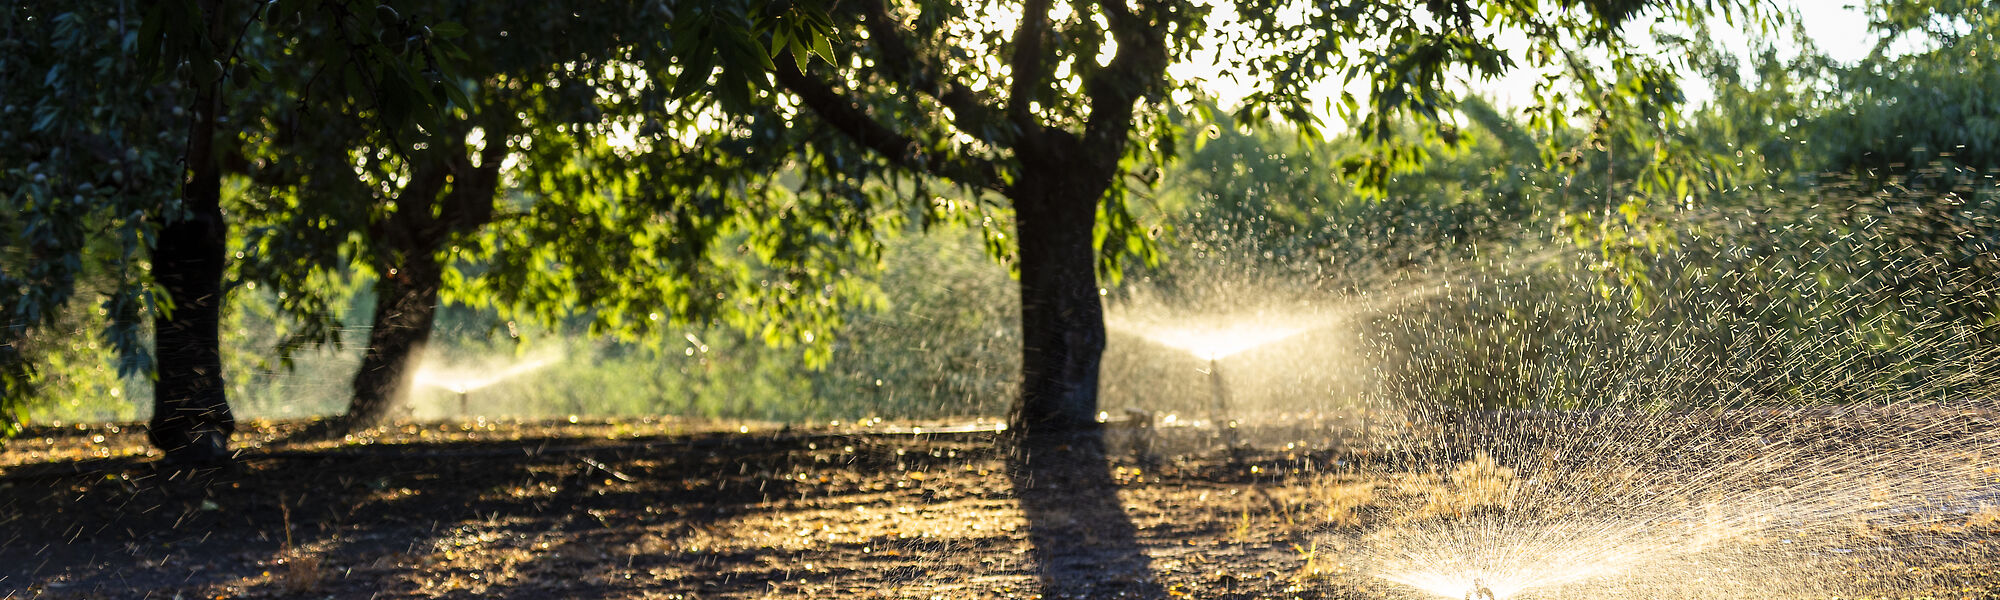 Nelson almond orchard sprinkler irrigation system in California